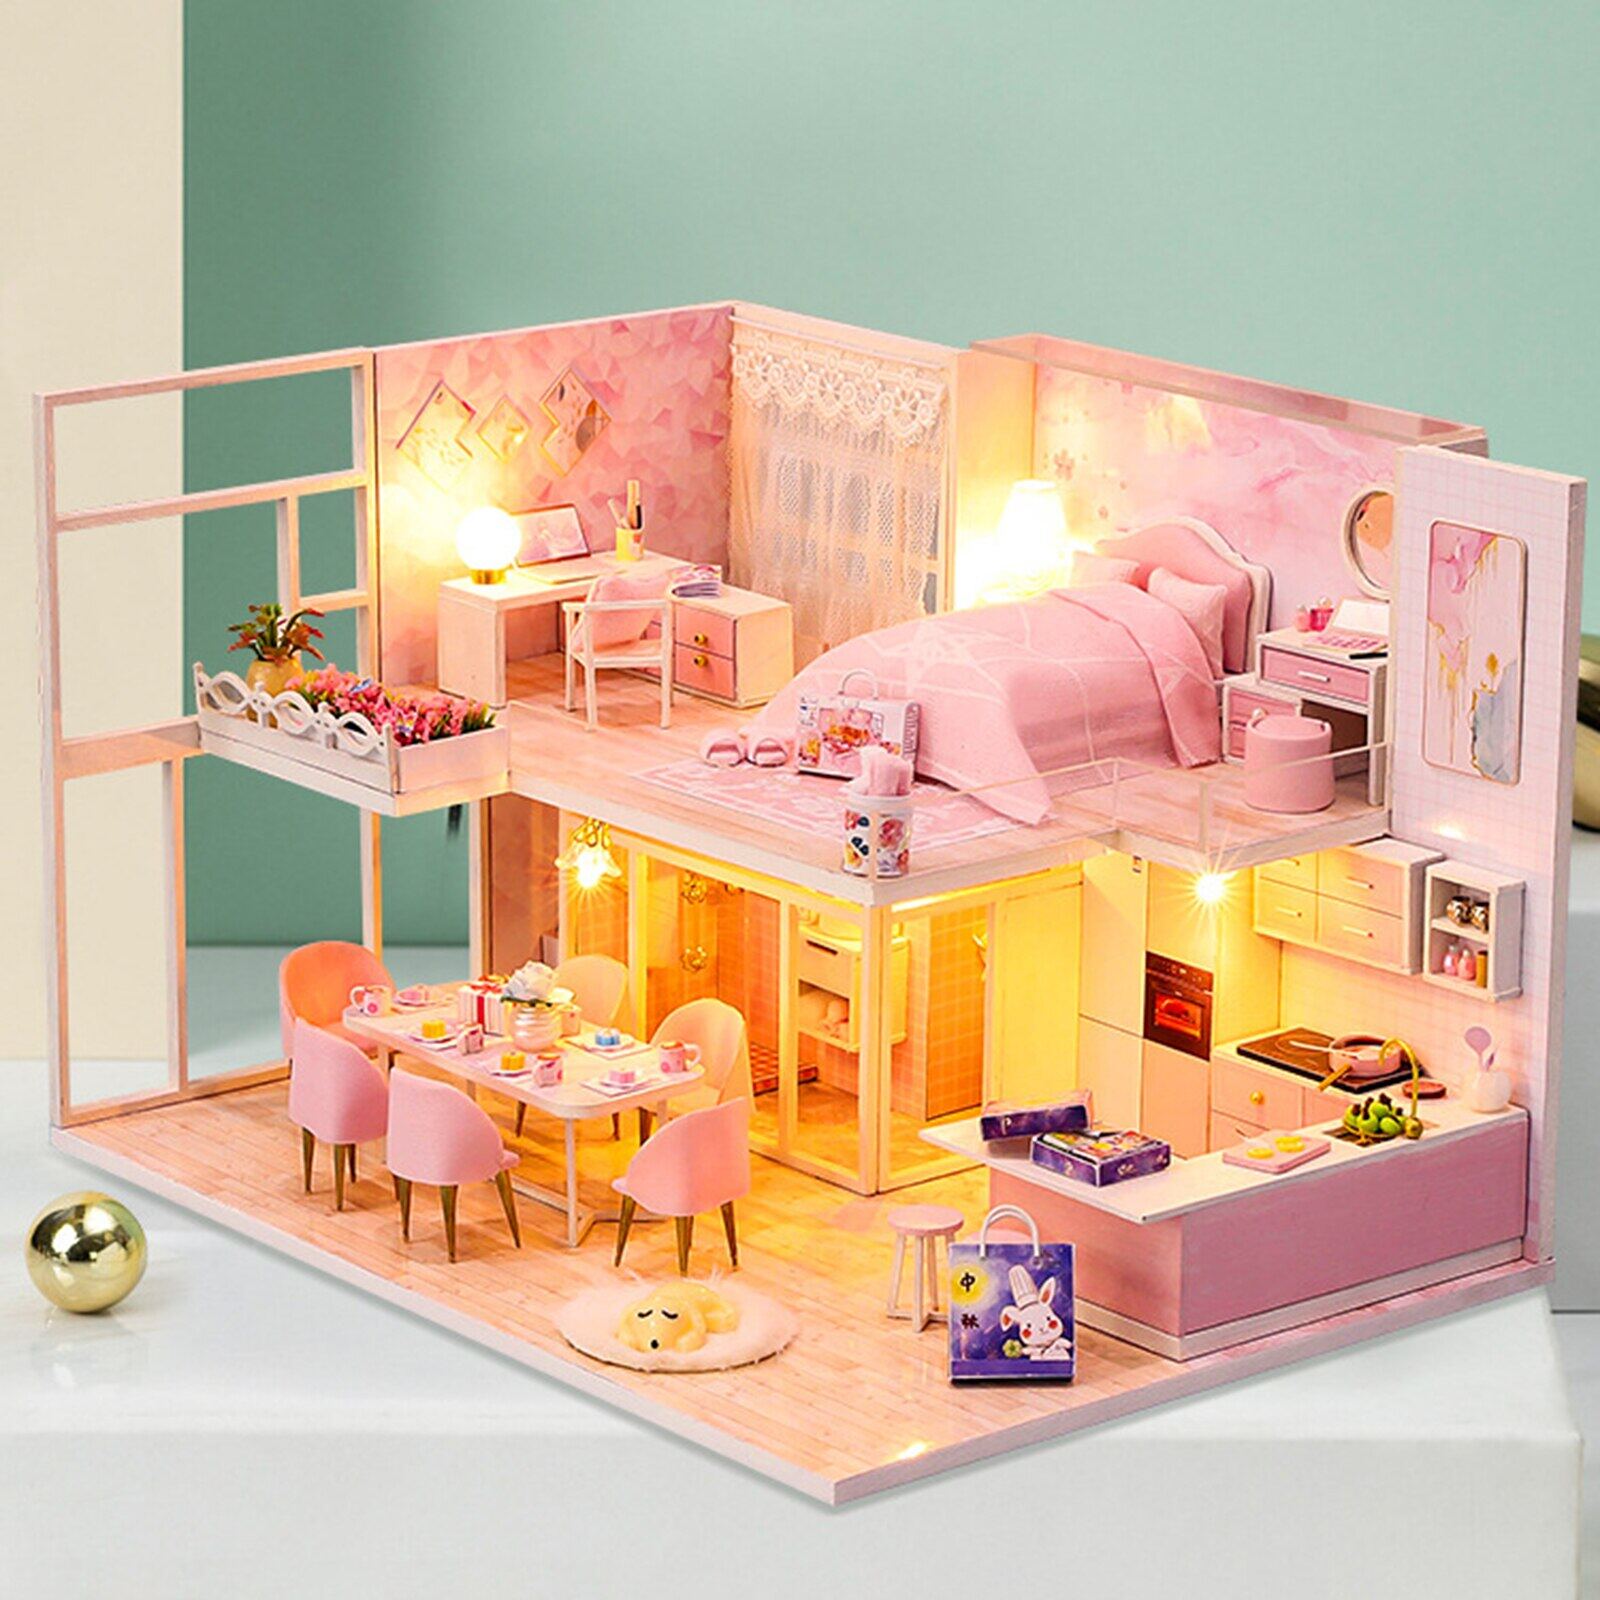 Self Assemble DIY Wooden House Toy Wooden Miniatura Doll Houses Miniature Dollhouse With Furniture LED Lights + Dustproof Cover